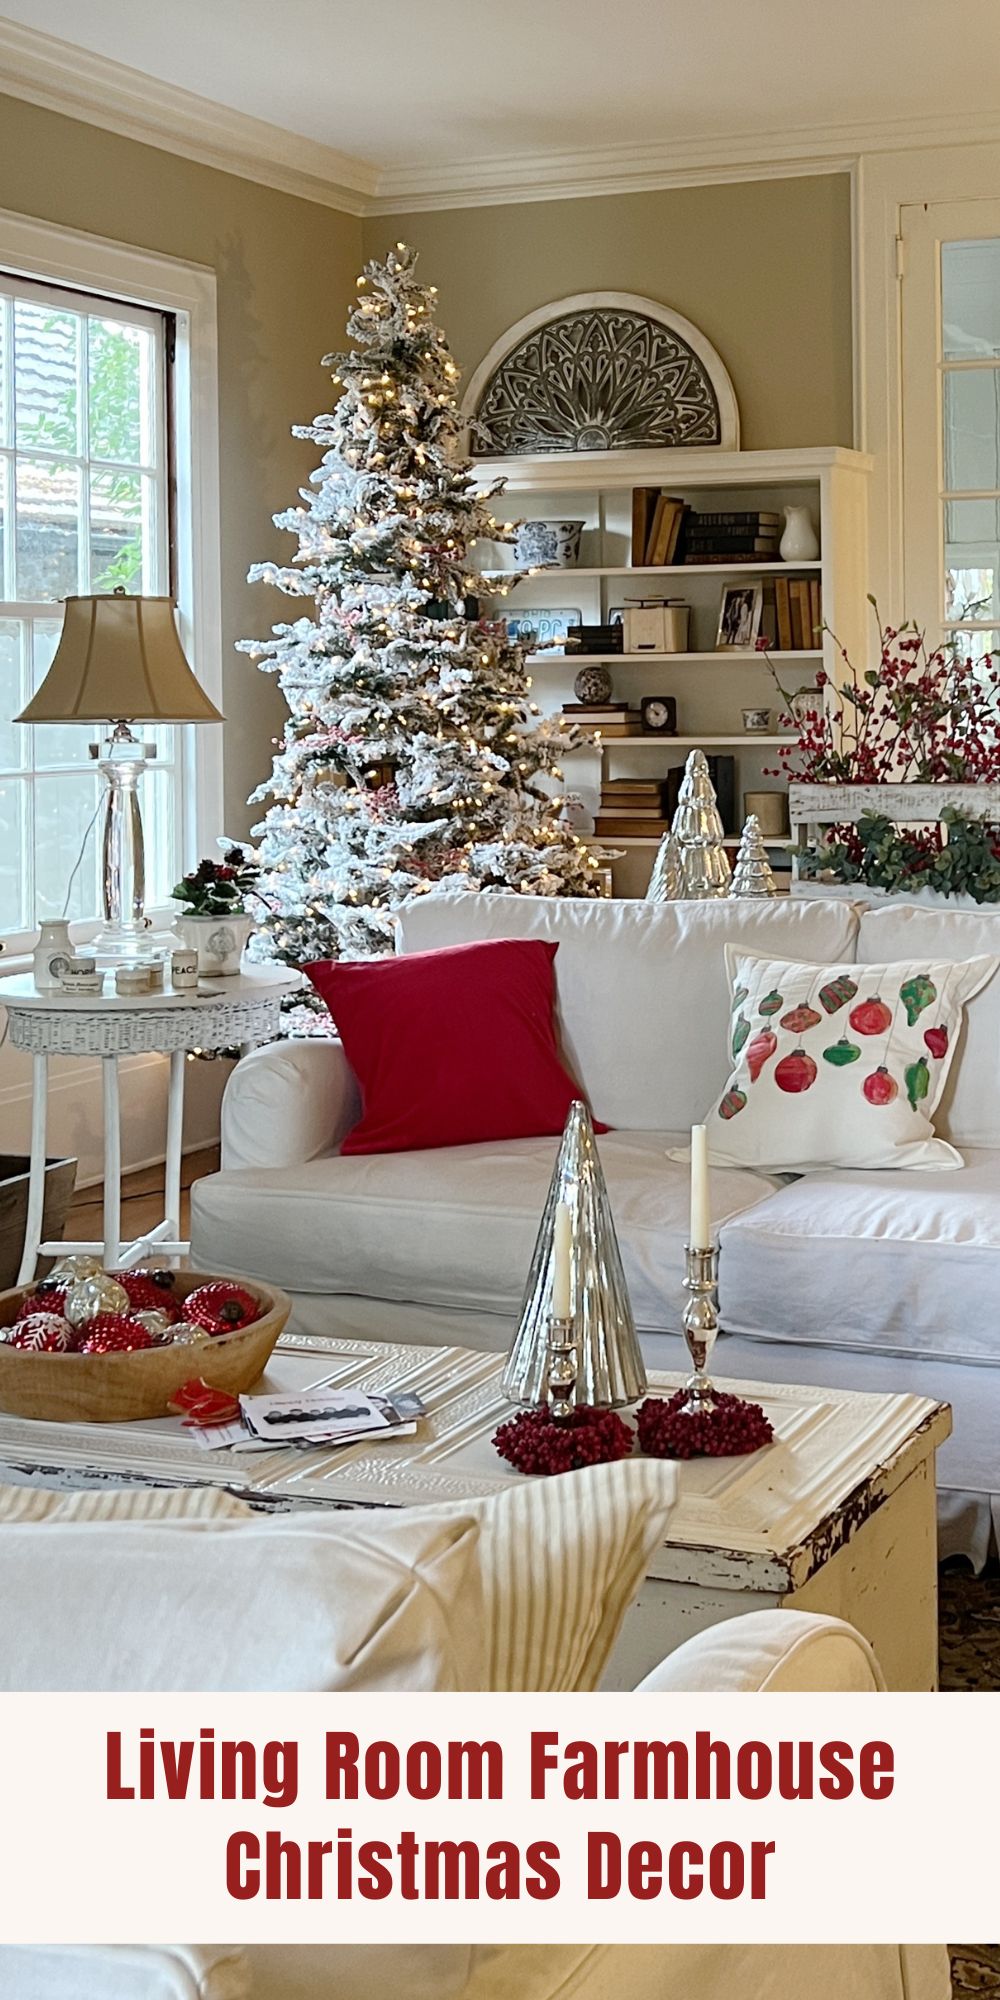 I am so happy to share our living room farmhouse Christmas decor. If you are looking for decor ideas I have so many here!